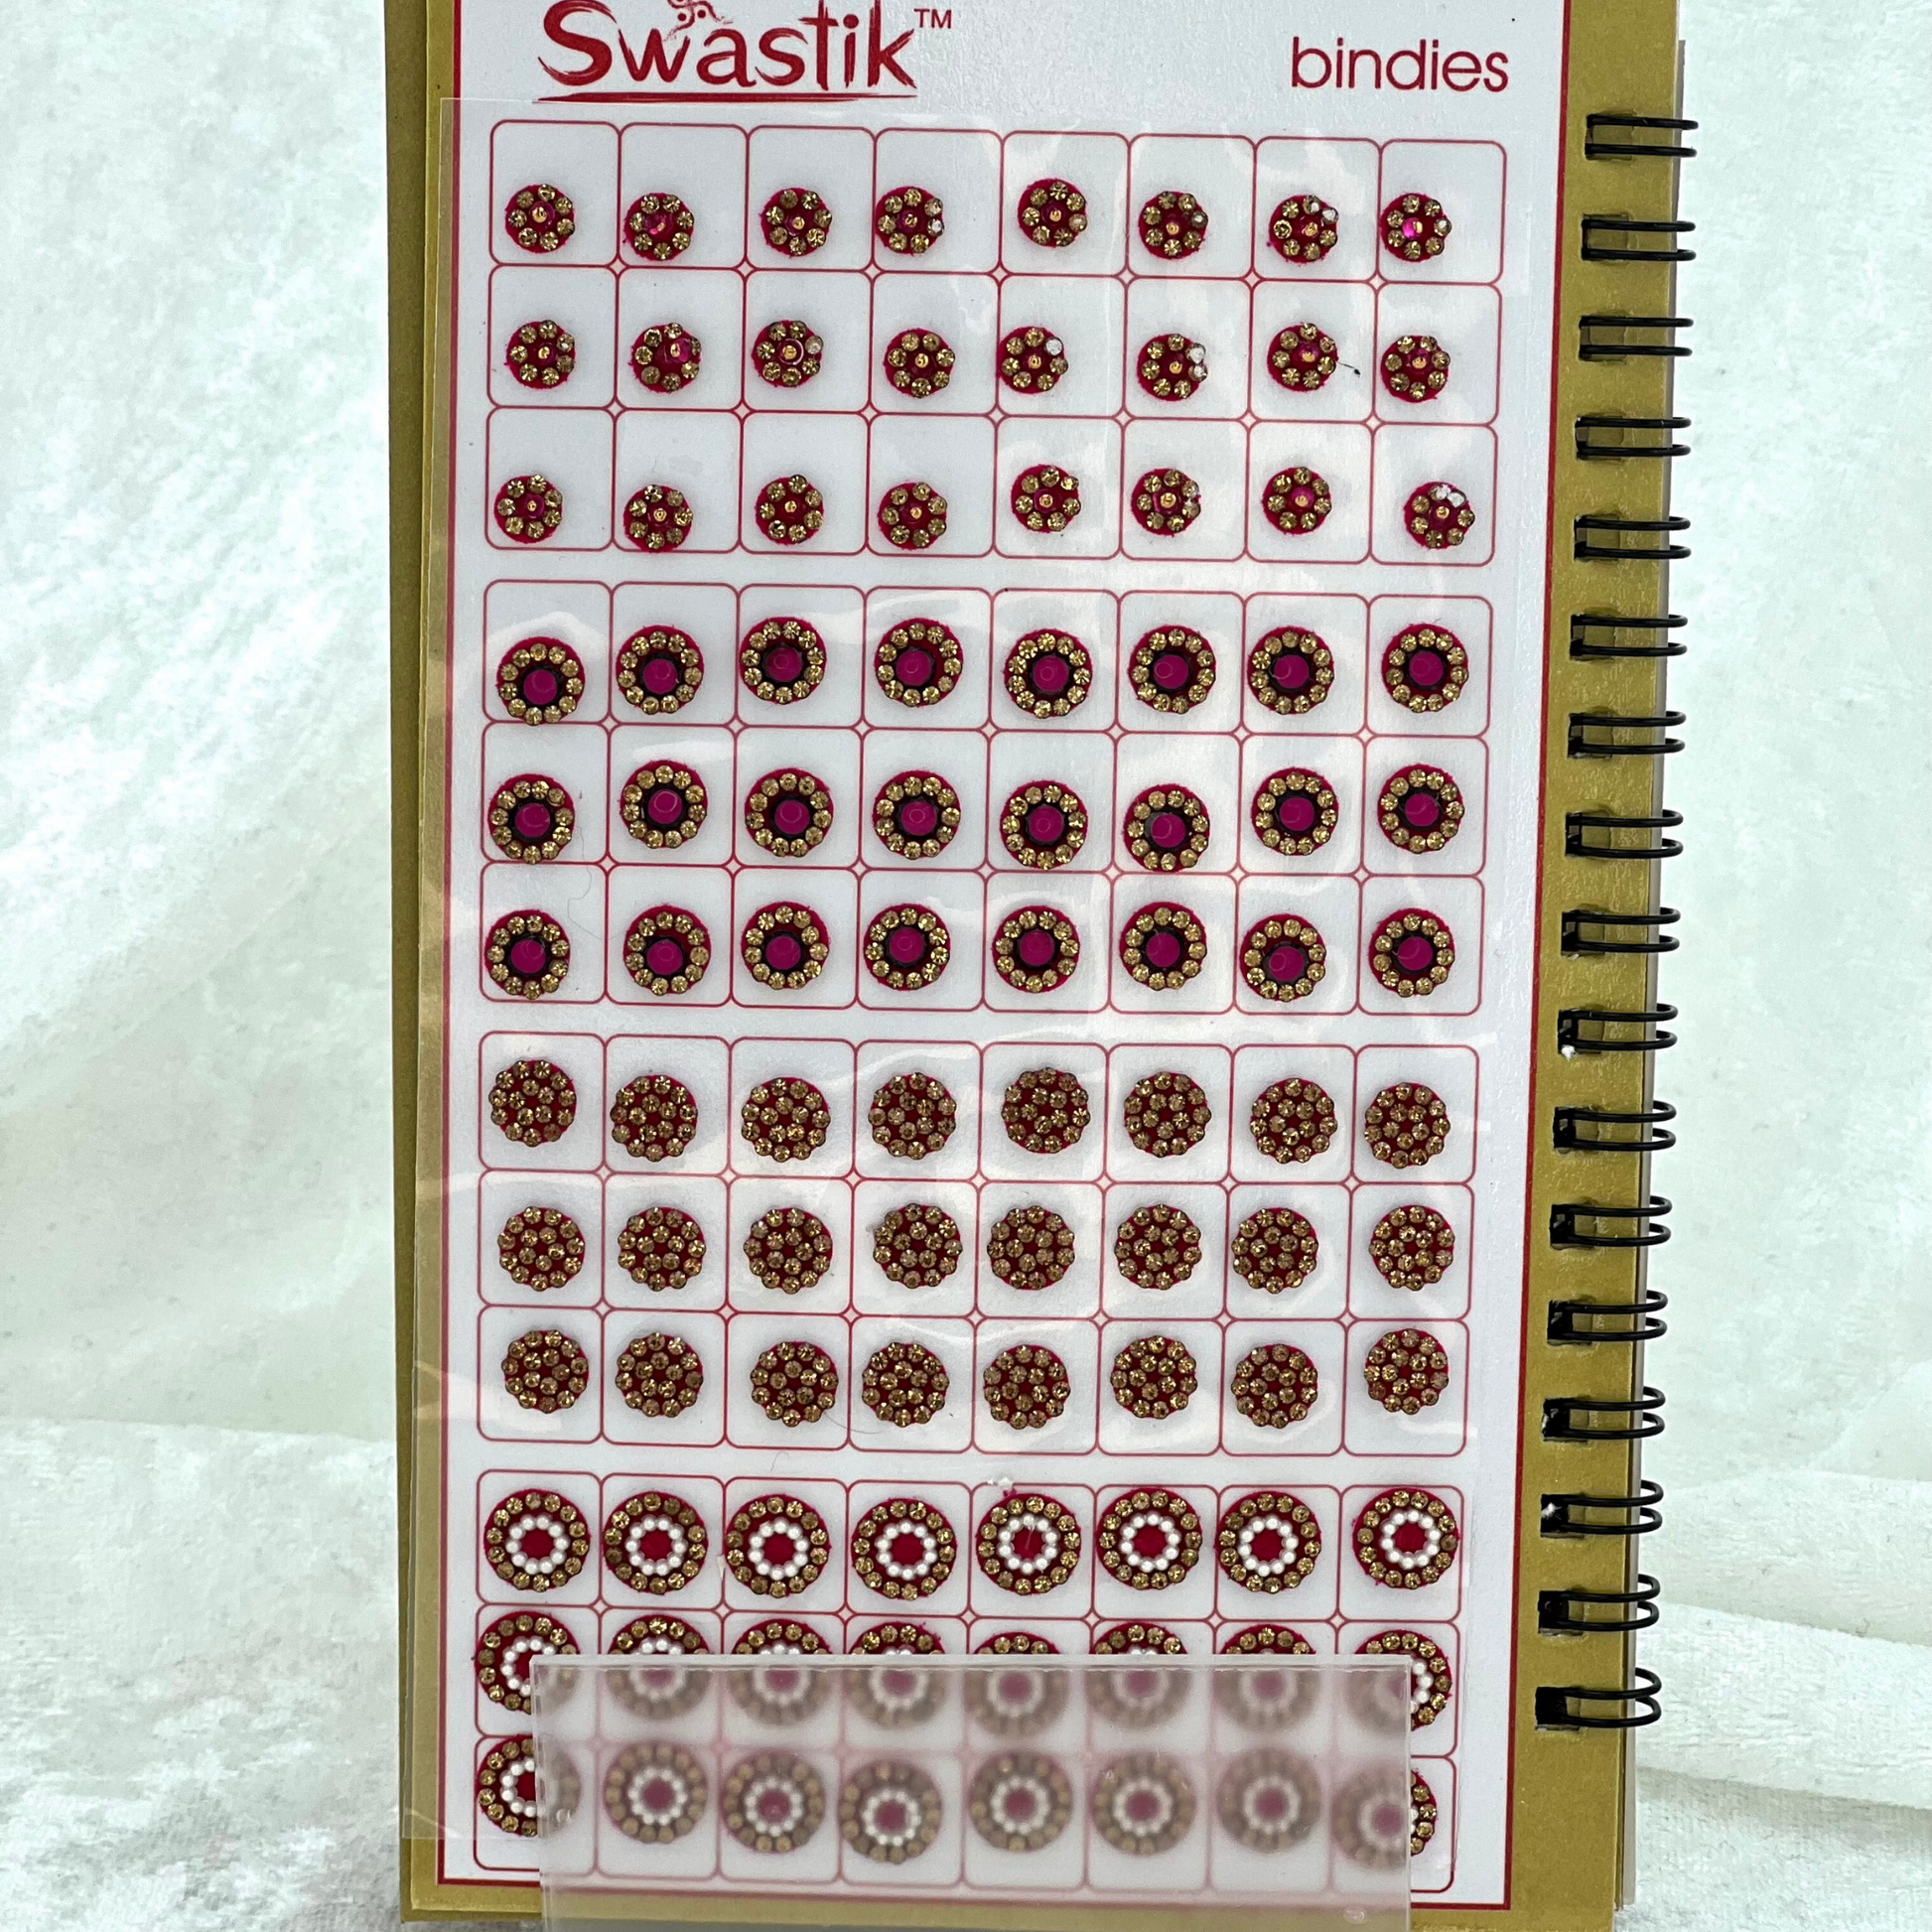 Bindi Book - Gold stone work in round shape in various different sizes and colours.  Prefect for Indian weddings, parties and special occasions.